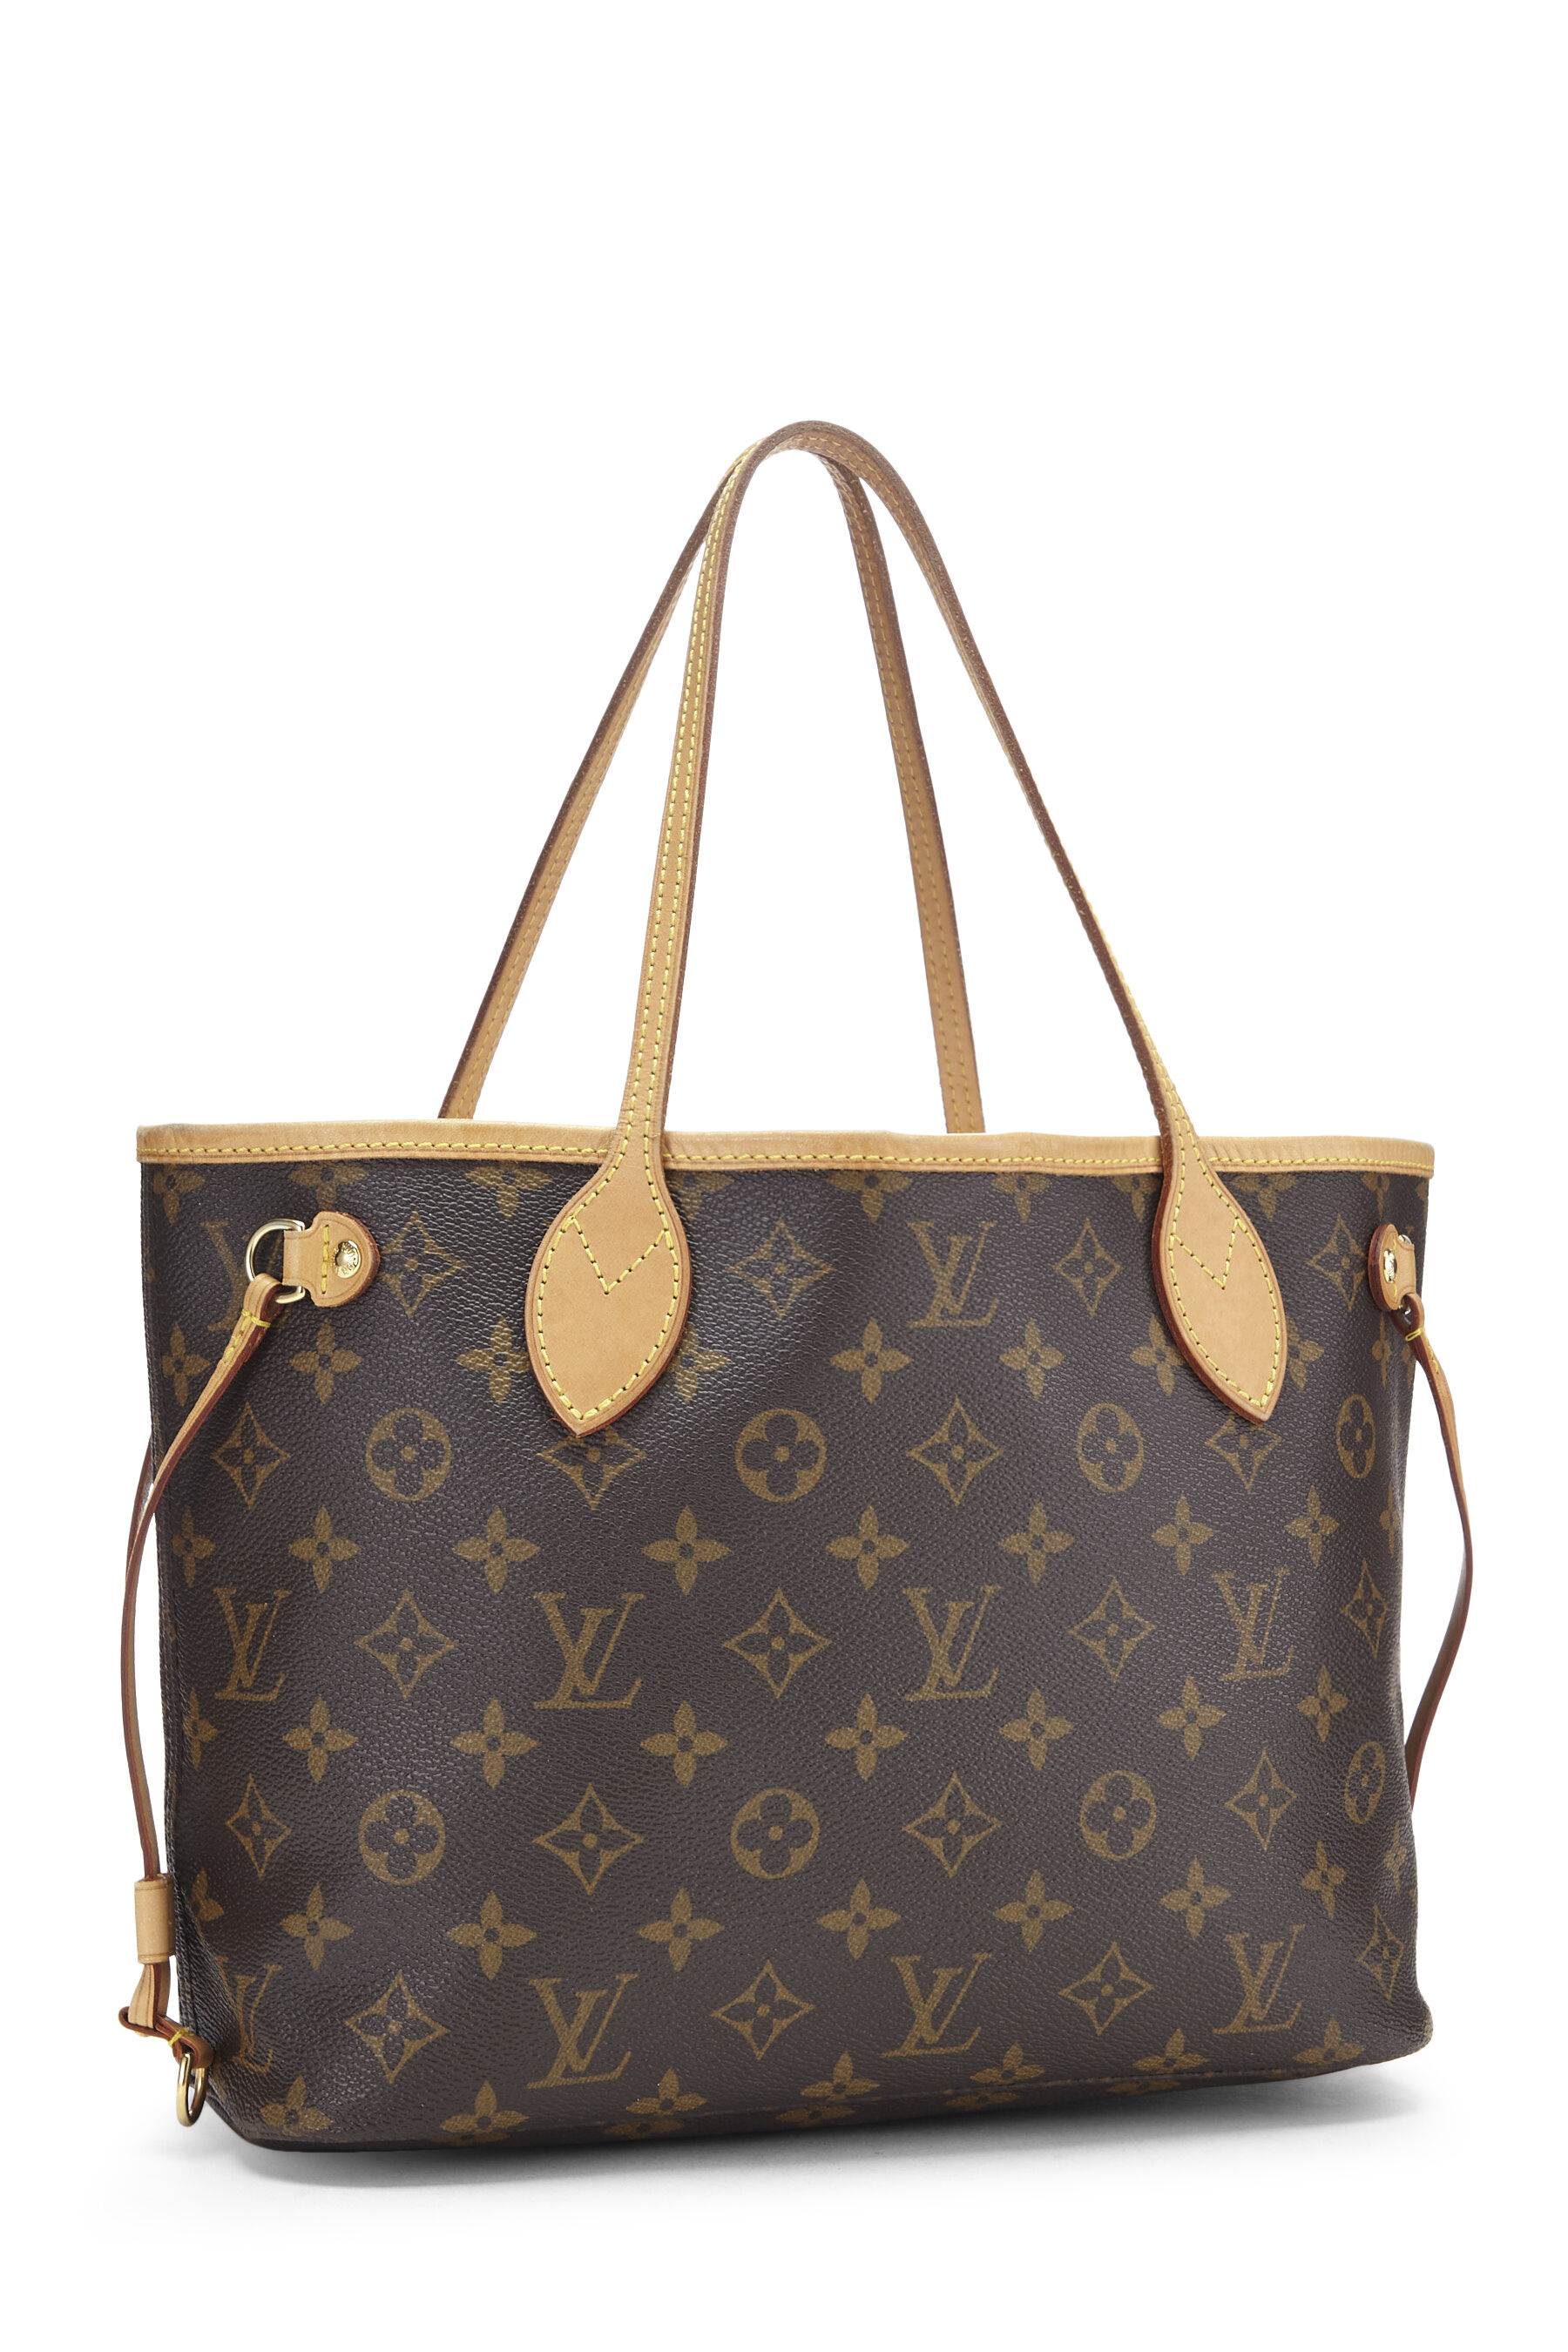 Louis Vuitton Neverfull Pm in Black